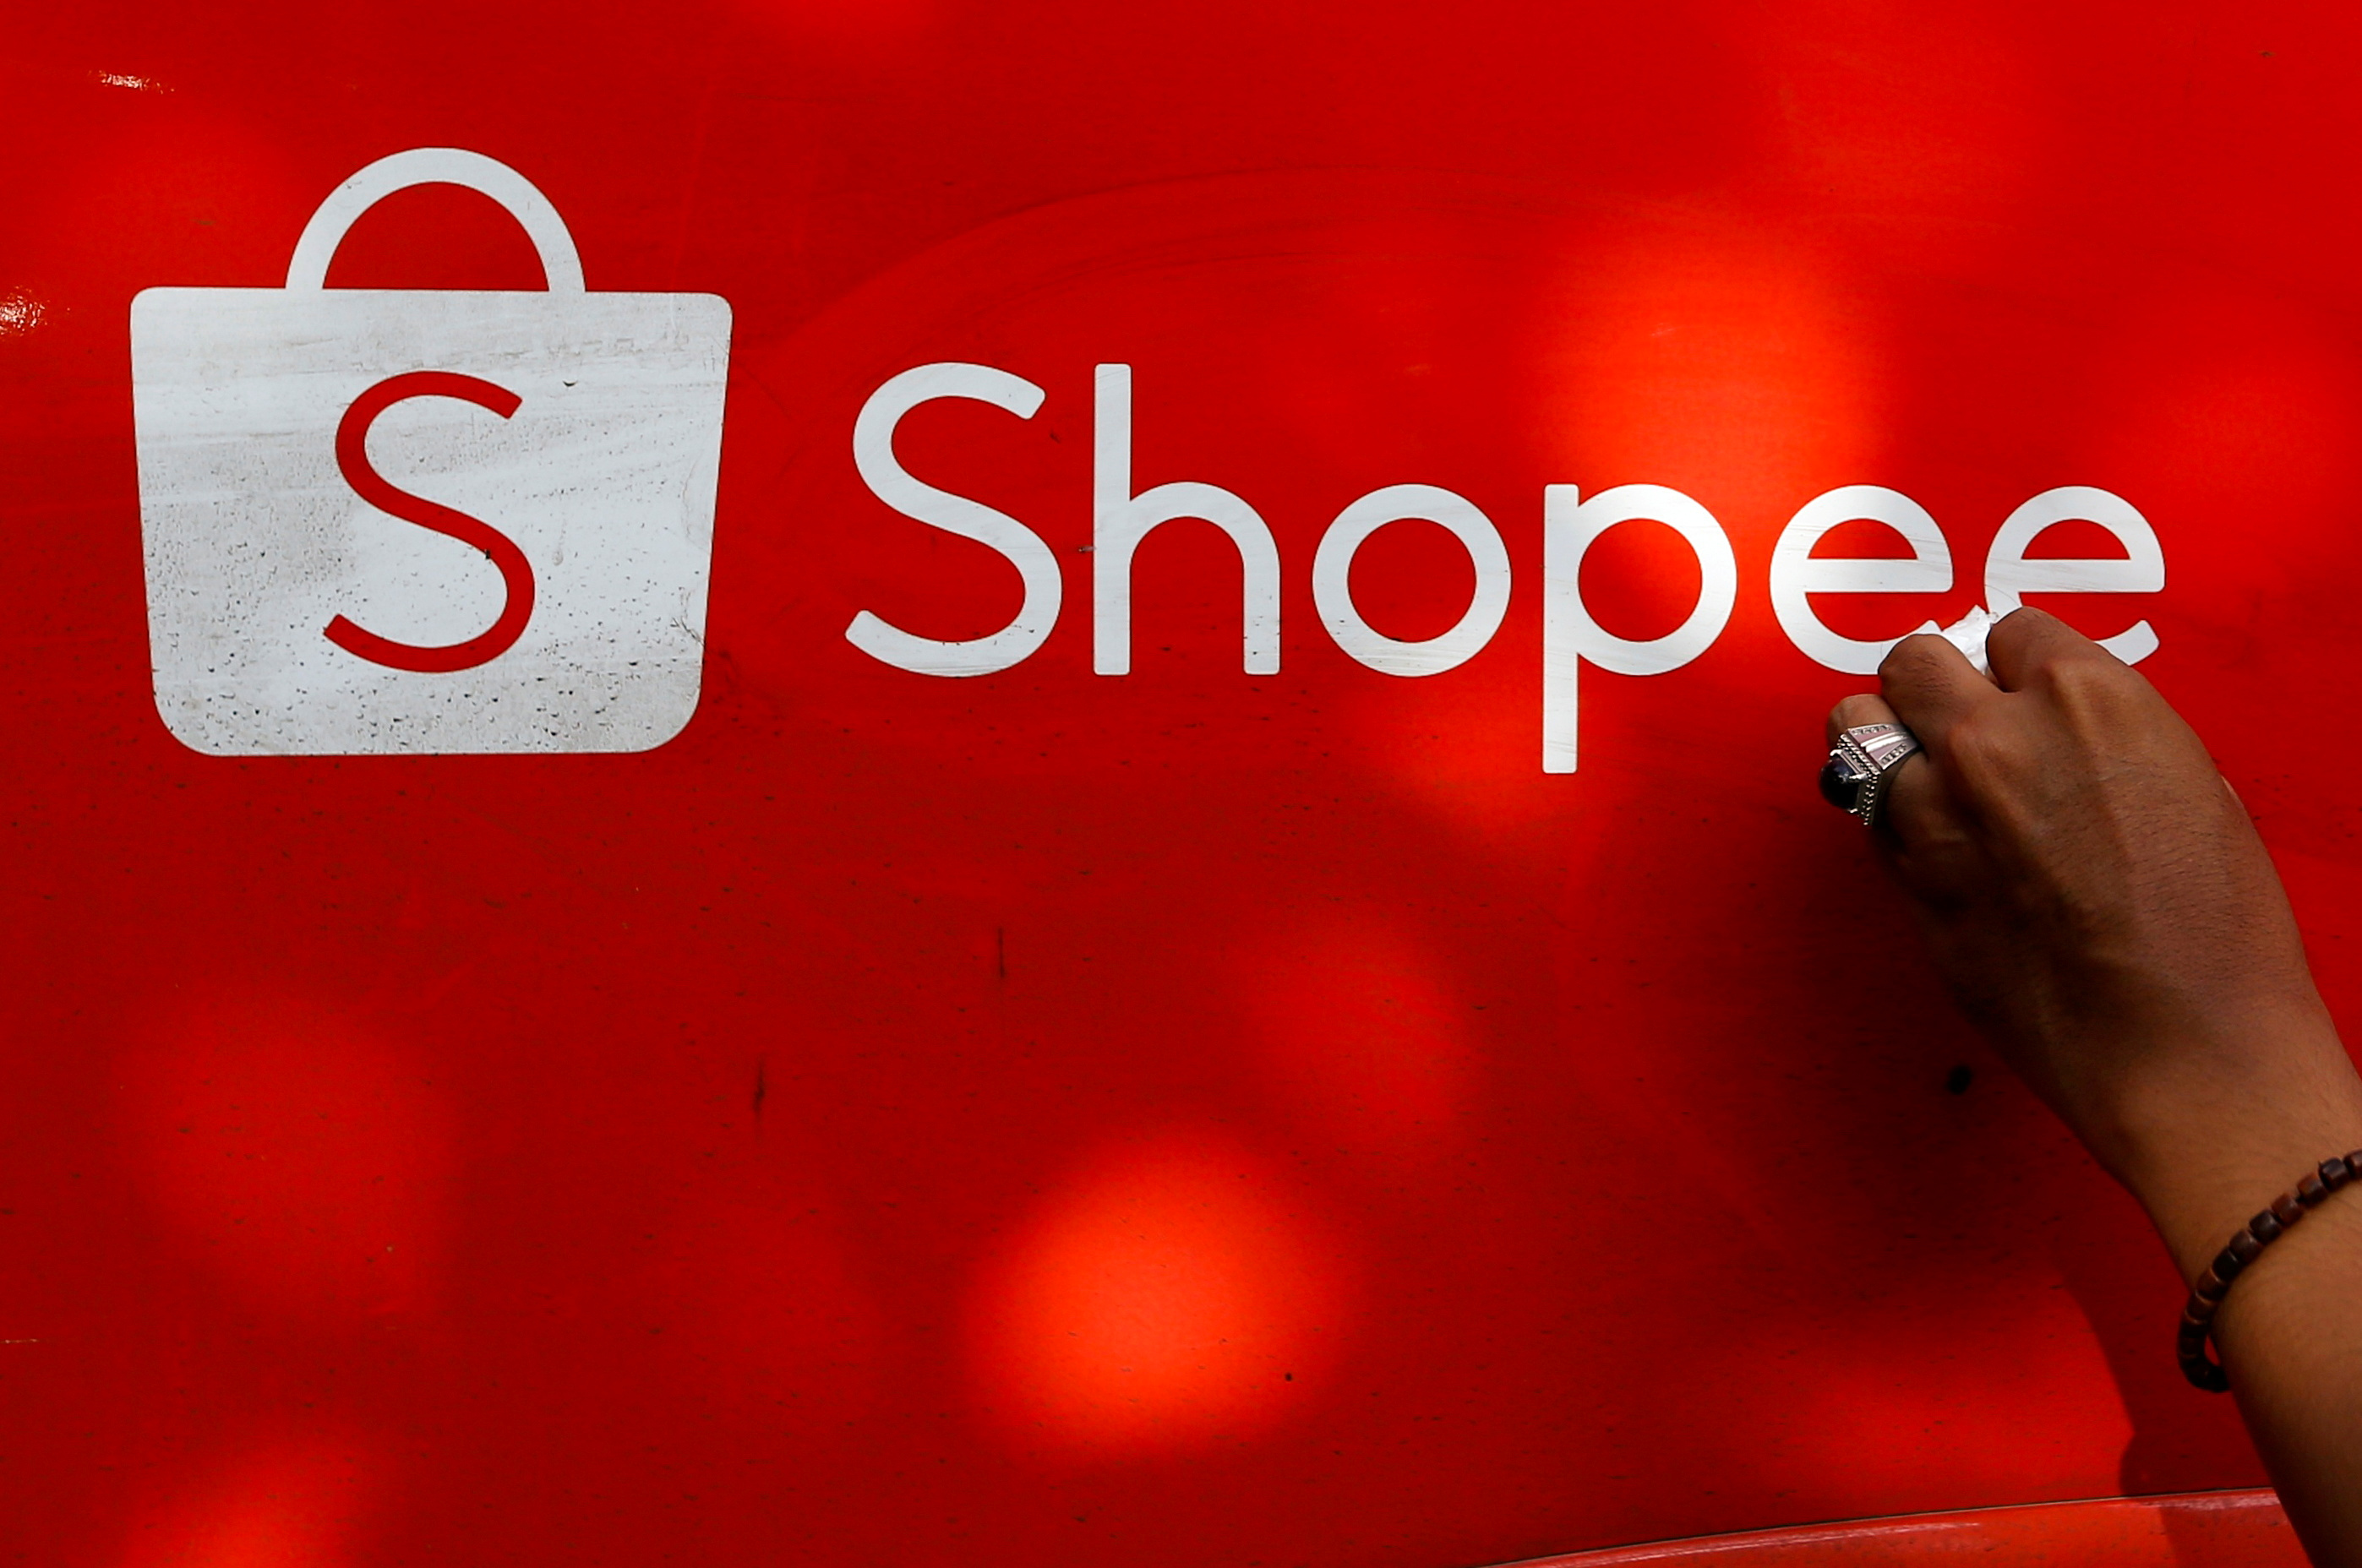 repeat-sea-s-shopee-to-enter-mexico-online-market-with-app-launch-reuters